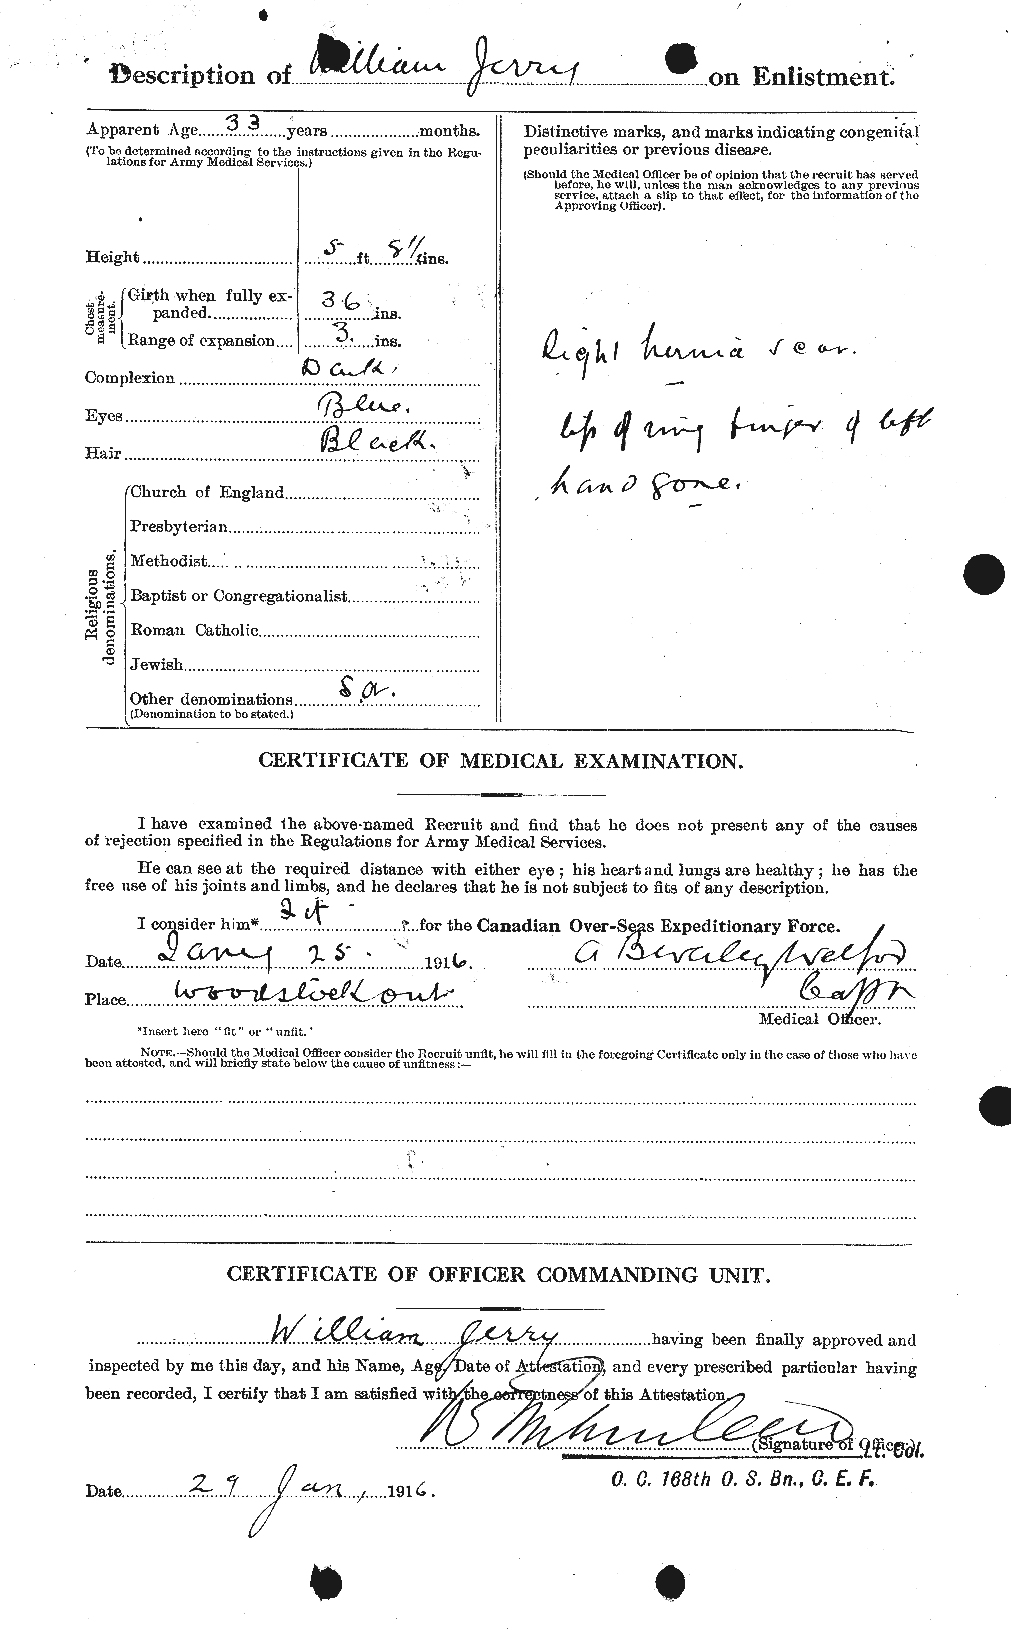 Personnel Records of the First World War - CEF 421807b